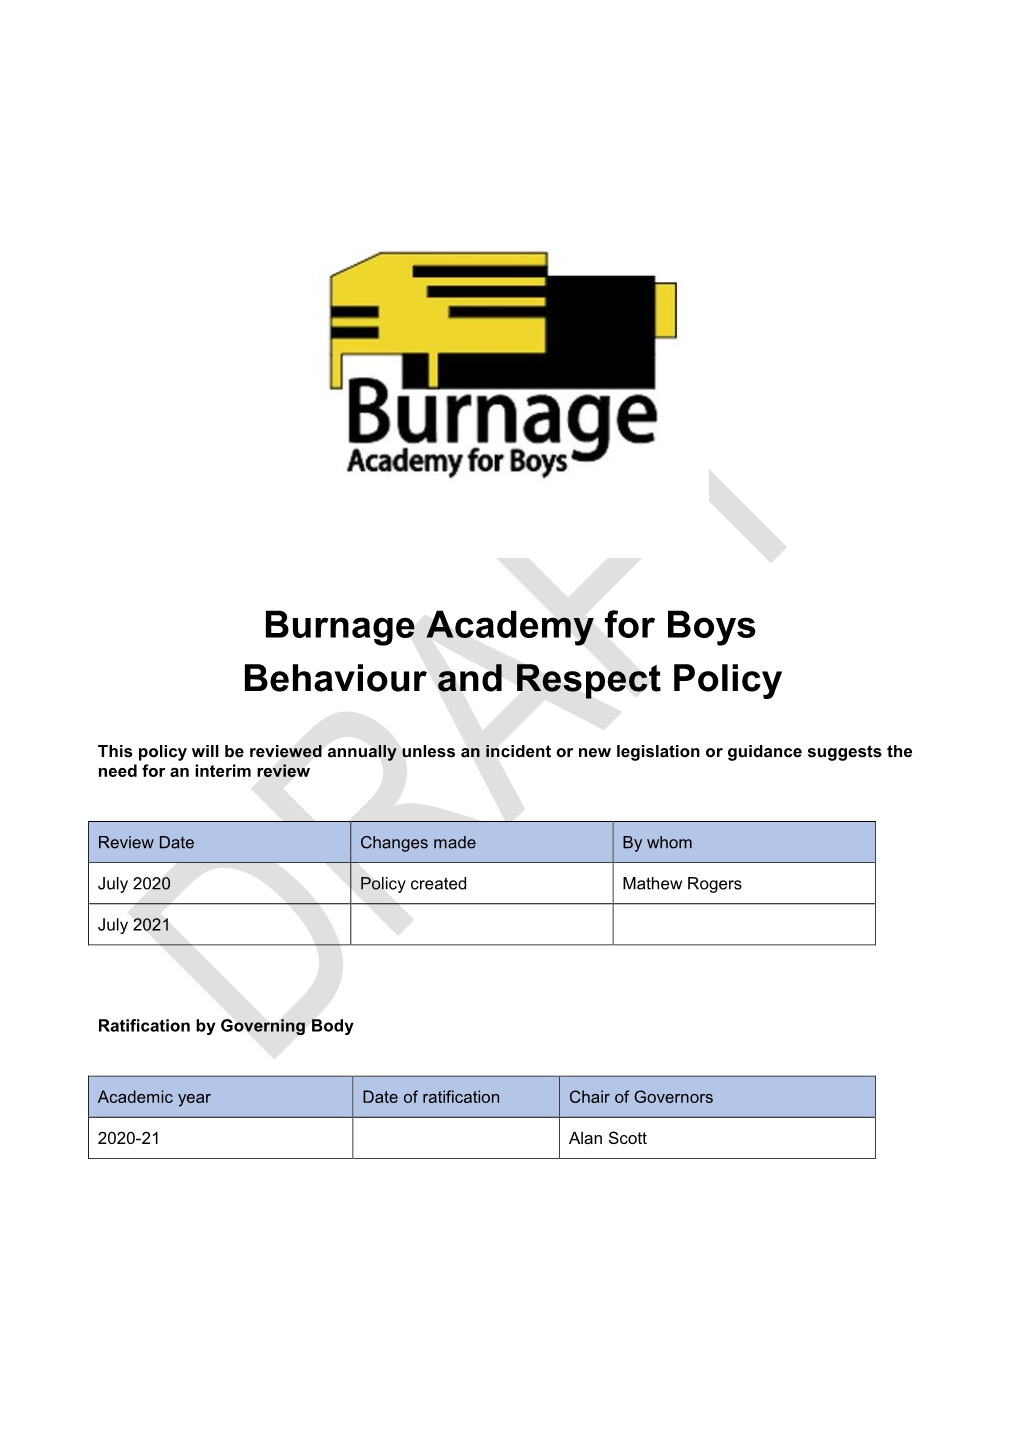 Burnage Academy for Boys Behaviour and Respect Policy